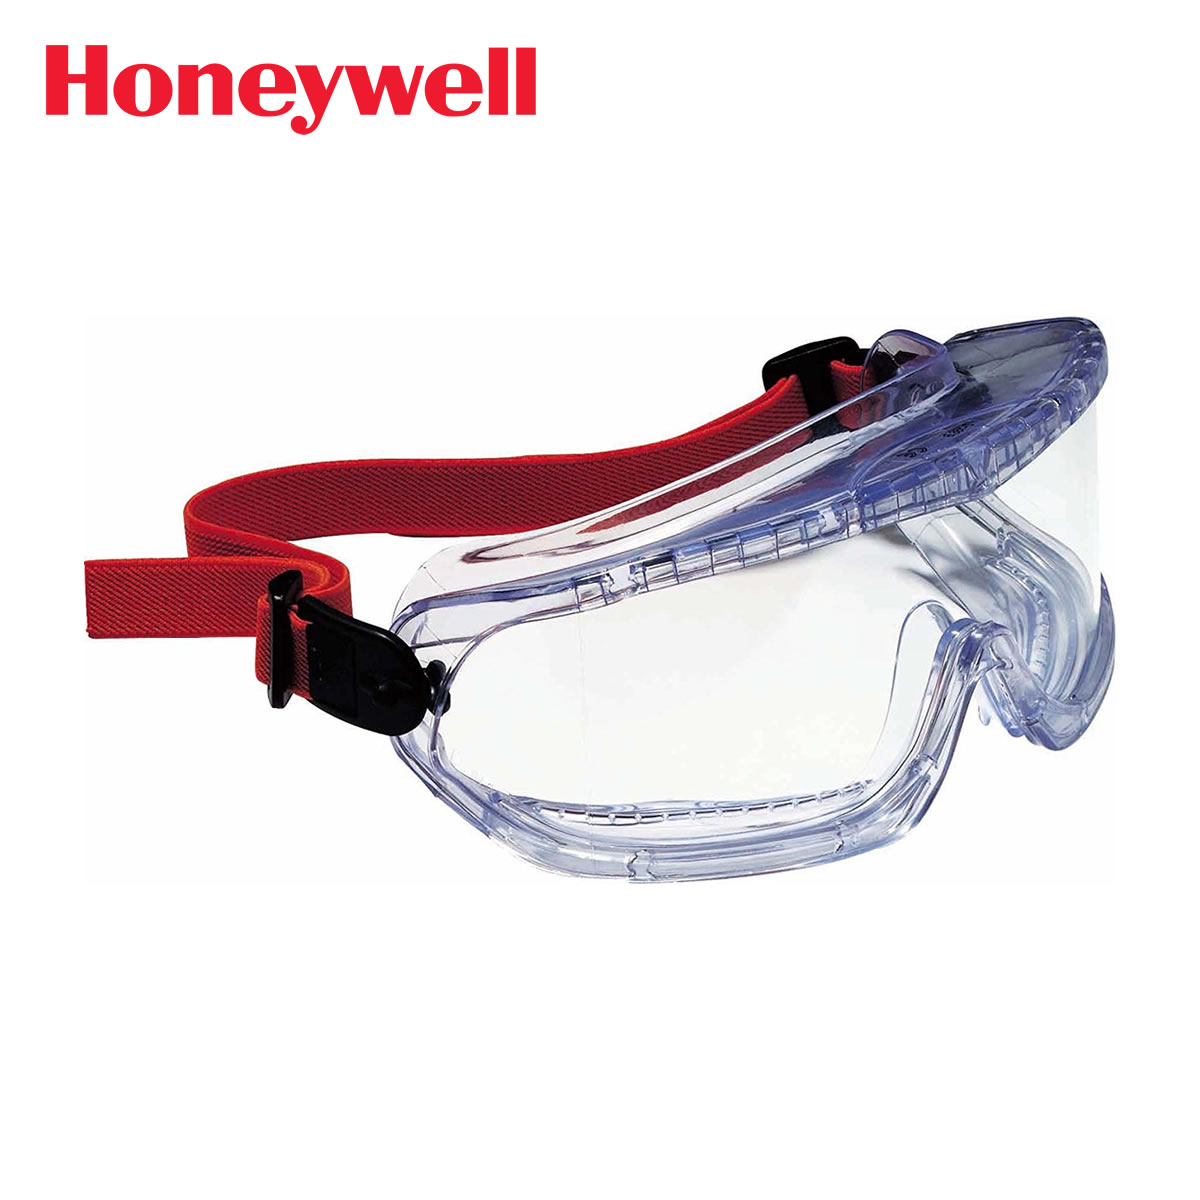 Honeywell 1006193 Pulsafe V-Maxx Full Sight Indirect Vent Safety Goggles